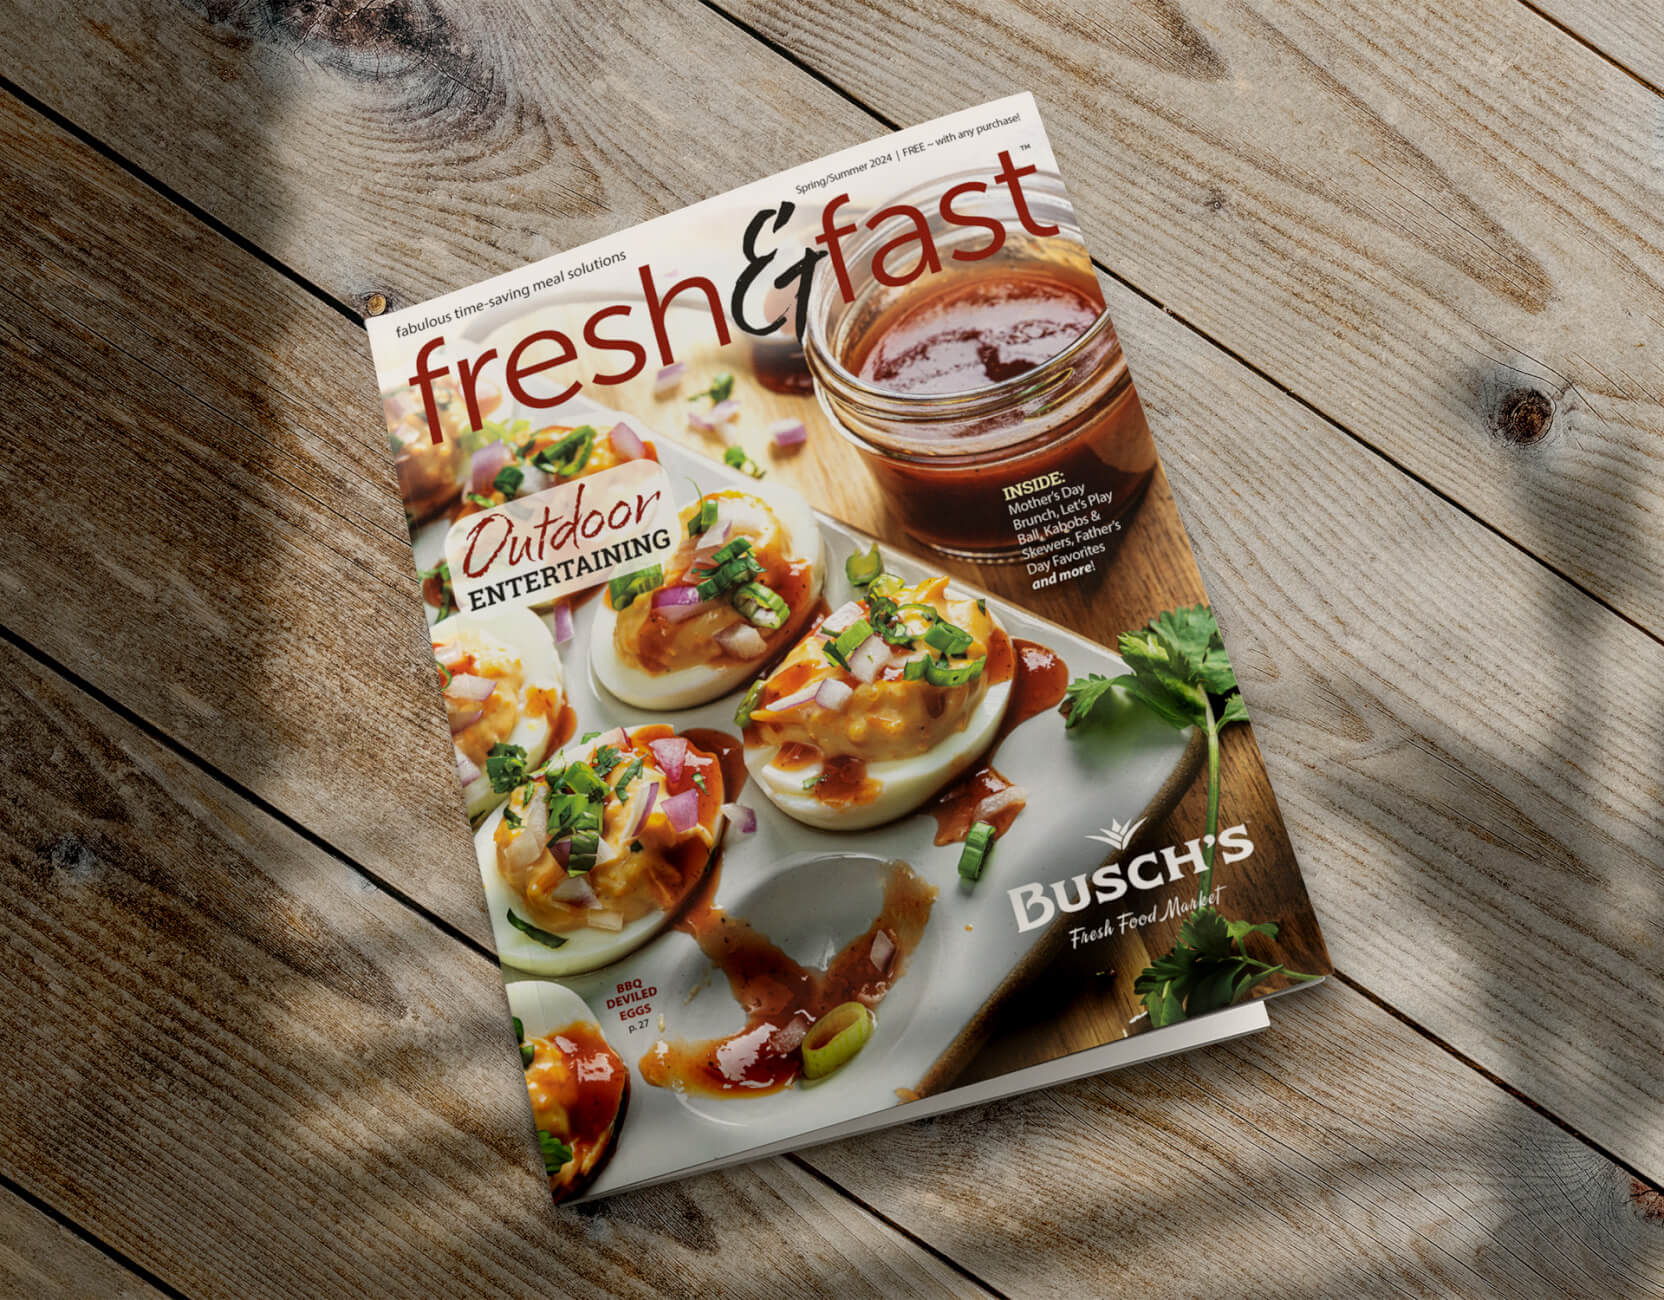 This is an image of a magazine titled "Fresh & Fast" resting on a wooden surface. The magazine cover features a photograph of a plate of beautifully arranged deviled eggs topped with vibrant garnishes, emphasizing outdoor entertaining. The cover also mentions "fabulous time-saving meal solutions" and includes the Busch's Fresh Food Market logo, indicating the magazine's affiliation with the grocery store. The overall layout is designed to appeal to readers interested in quick and easy gourmet recipes for social gatherings.